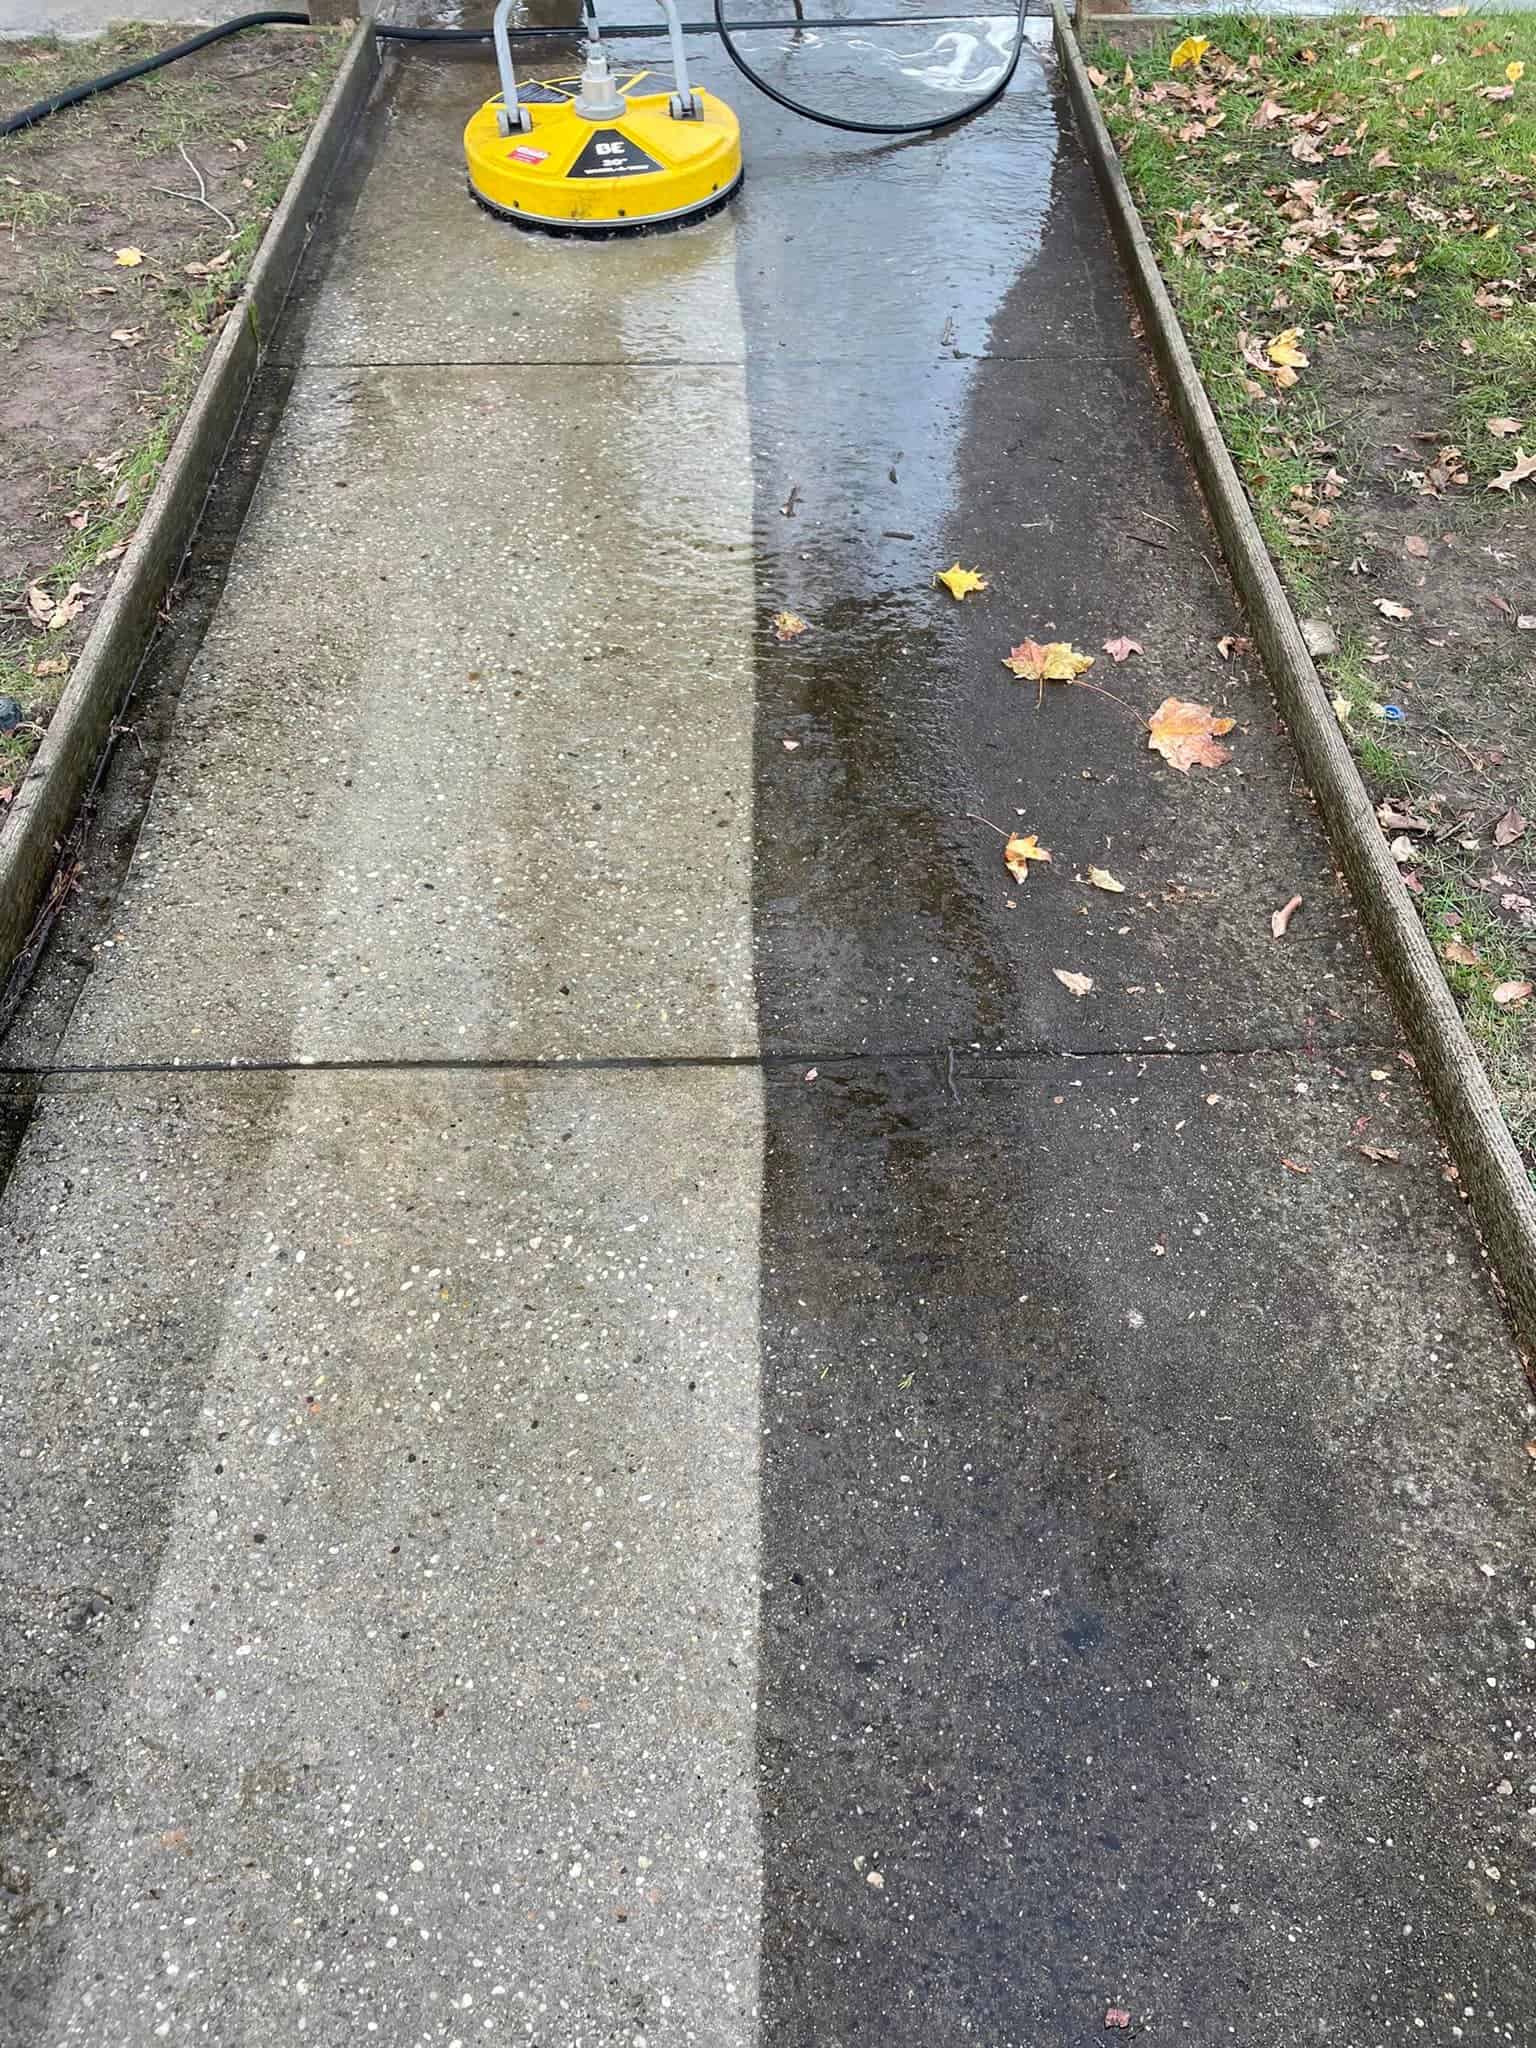 Power Washing Services Near Me in East Moriches, NY